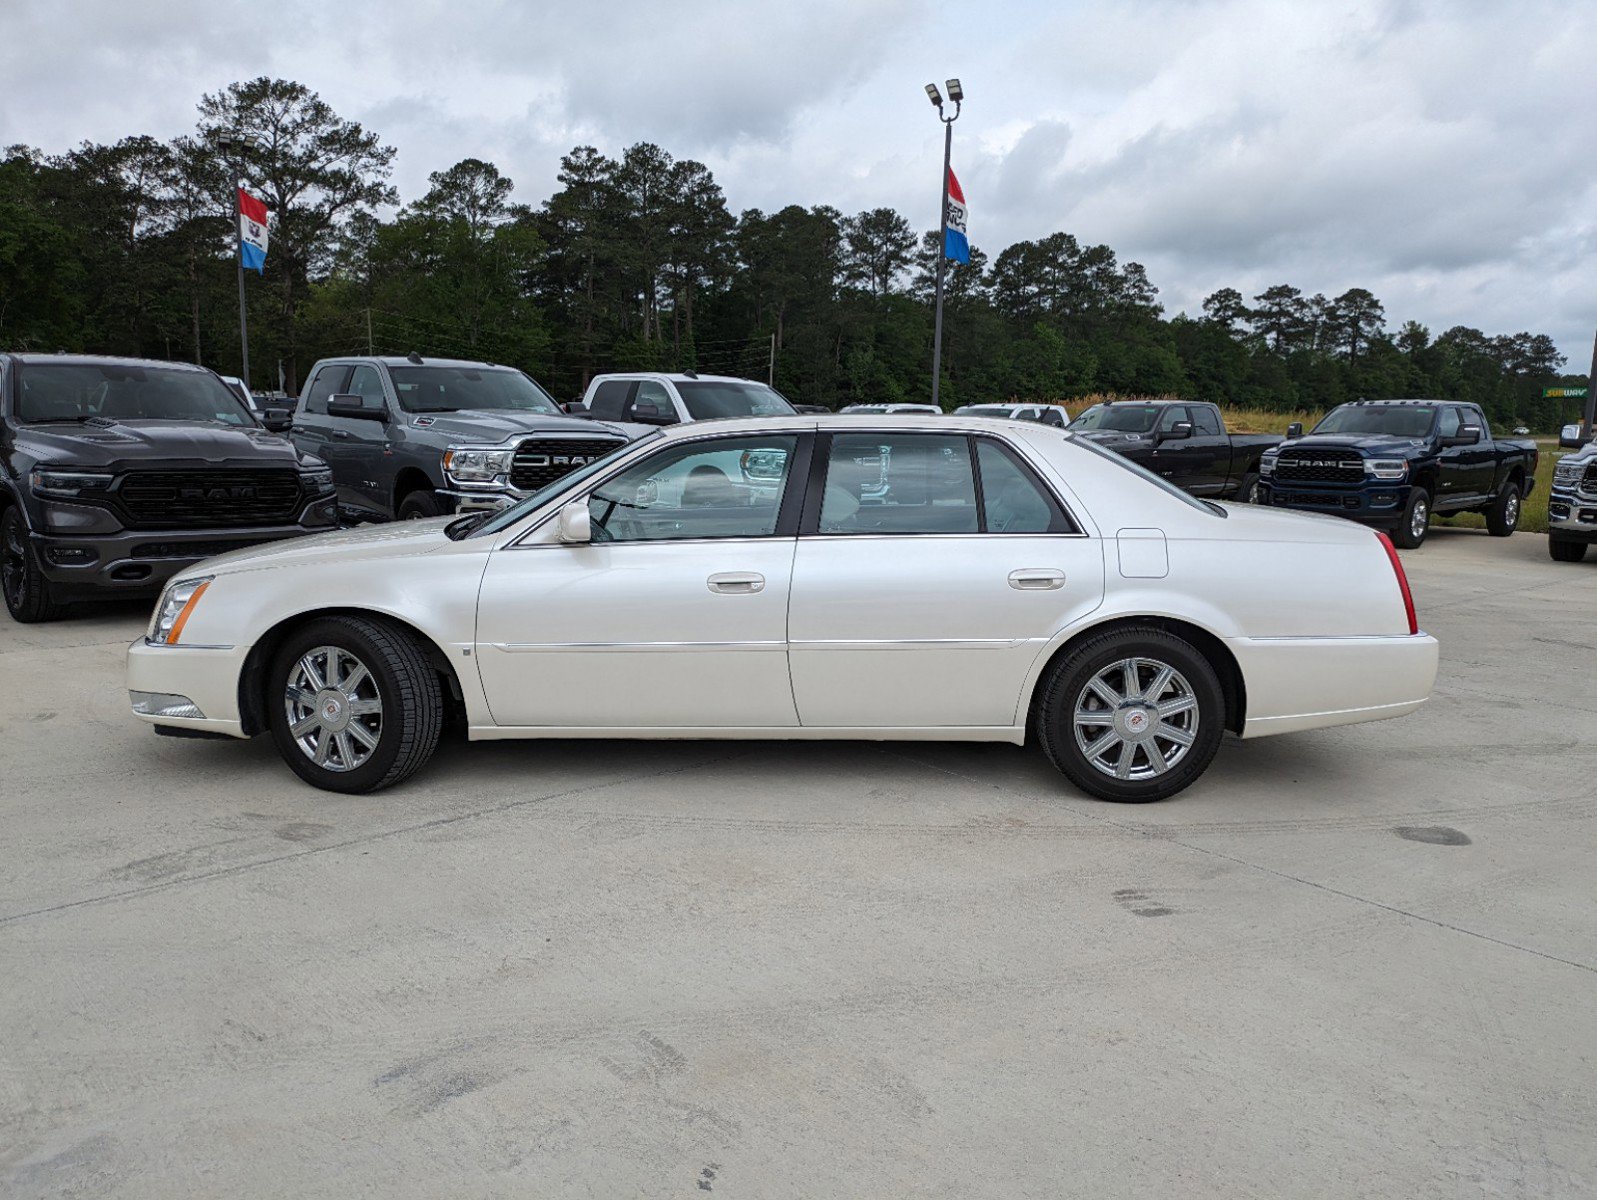 Used 2008 Cadillac DTS 1SD with VIN 1G6KD57Y68U169291 for sale in Seminary, MS